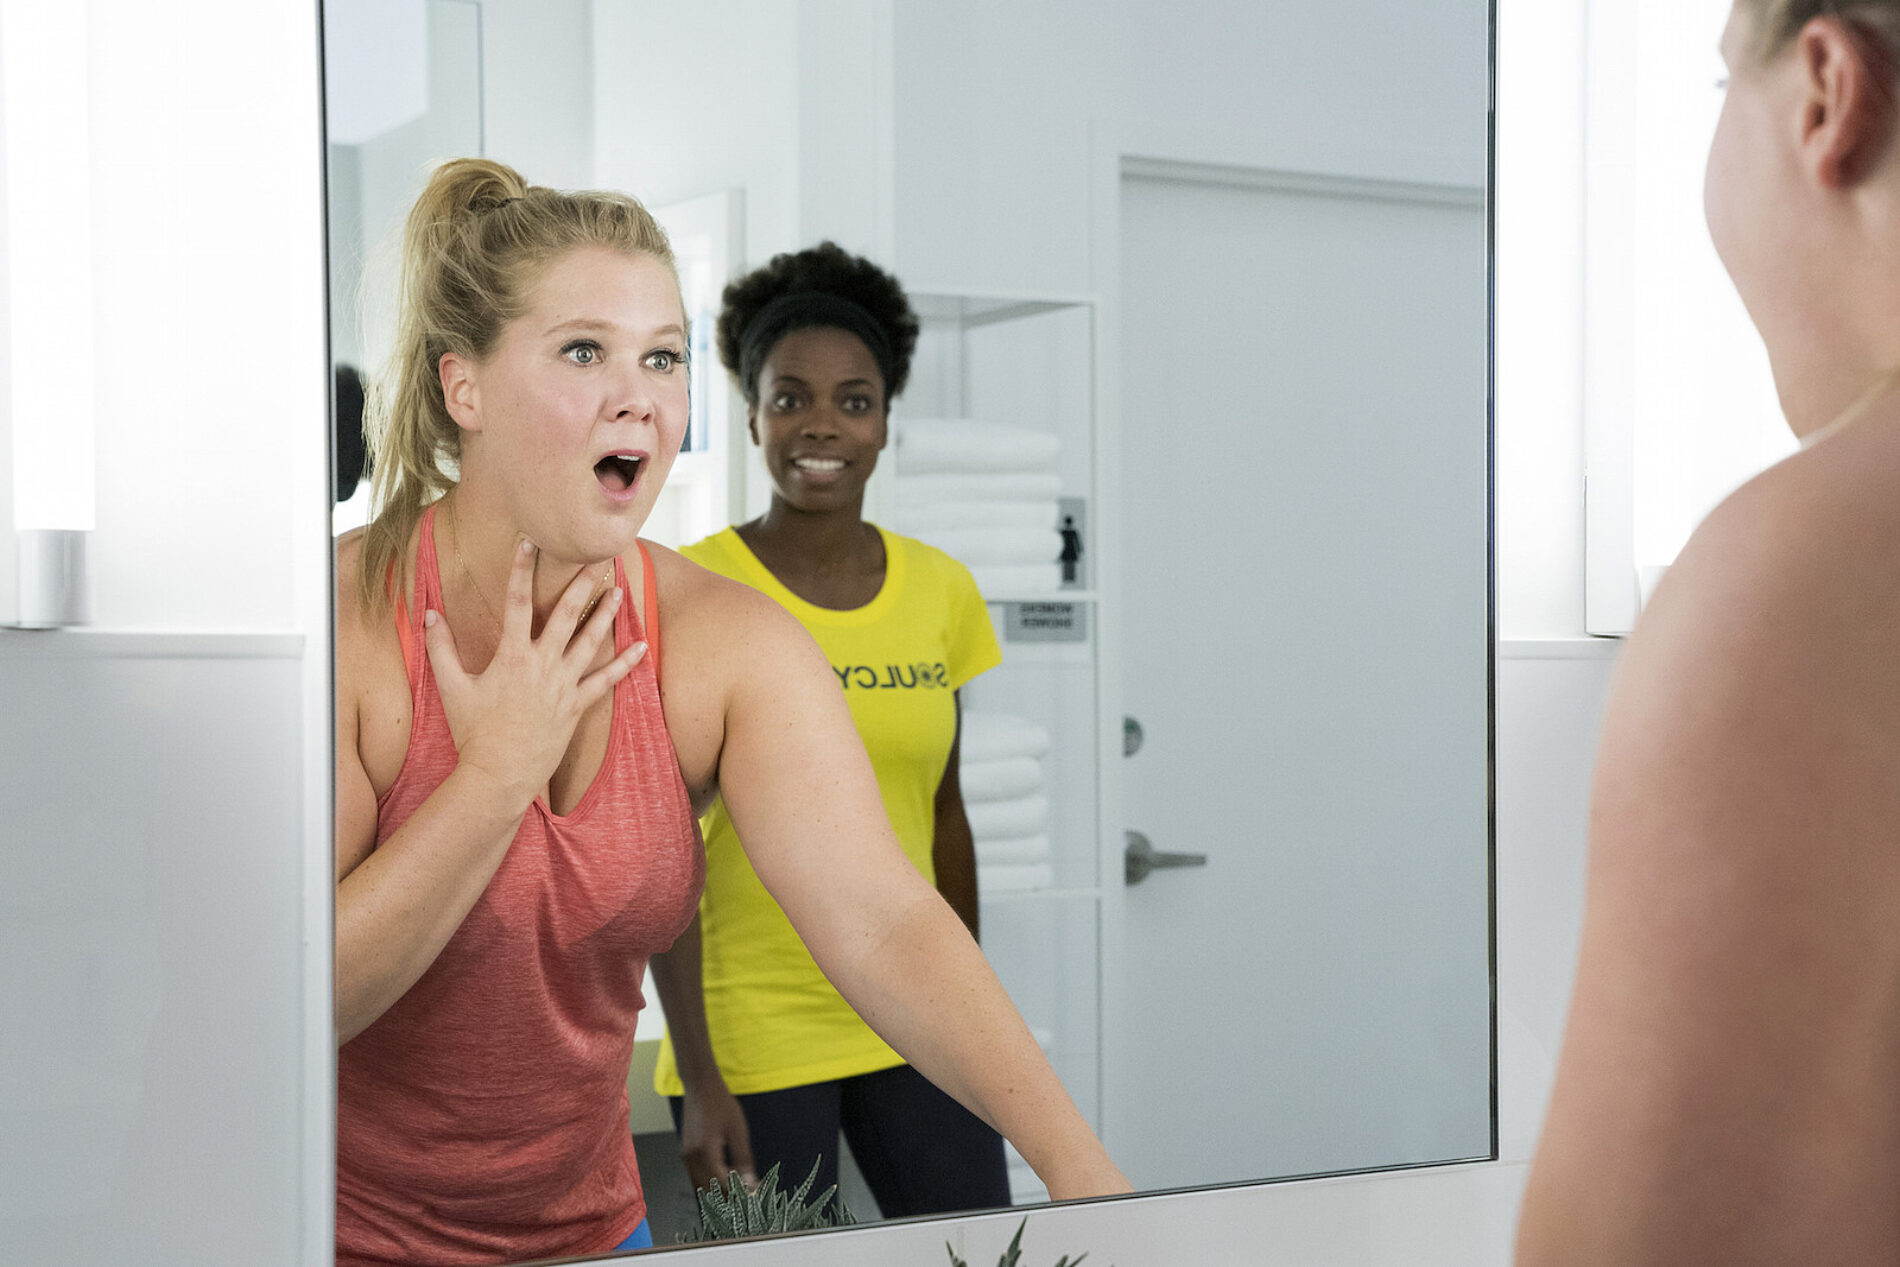 ‘I Feel Pretty’ Review: Amy Schumer’s New Comedy Has Problems